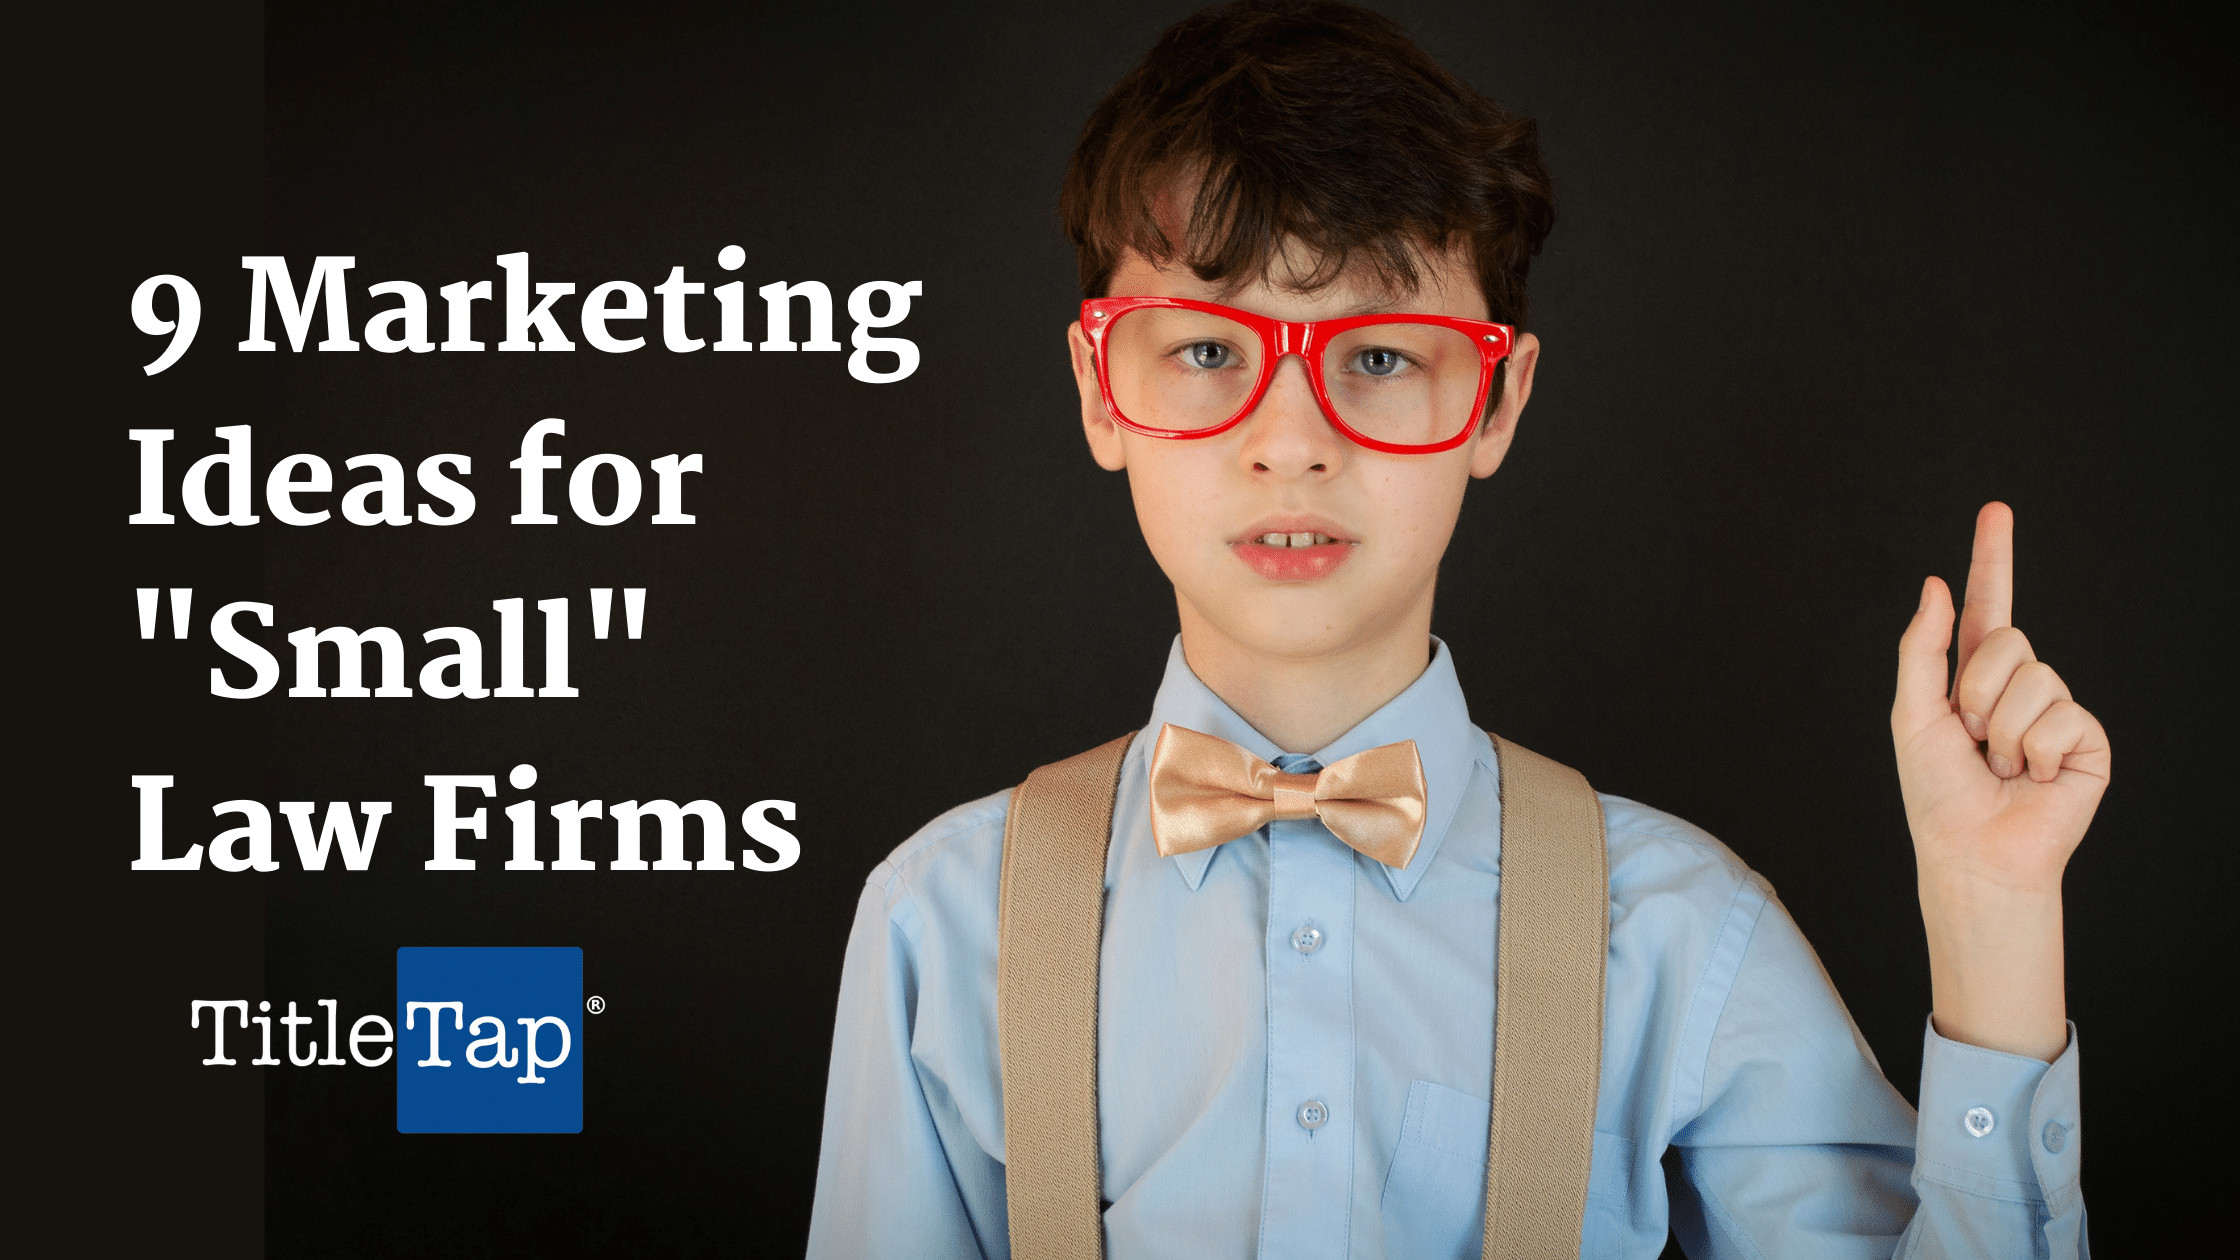 9 Marketing Ideas for “Small” Law Firms